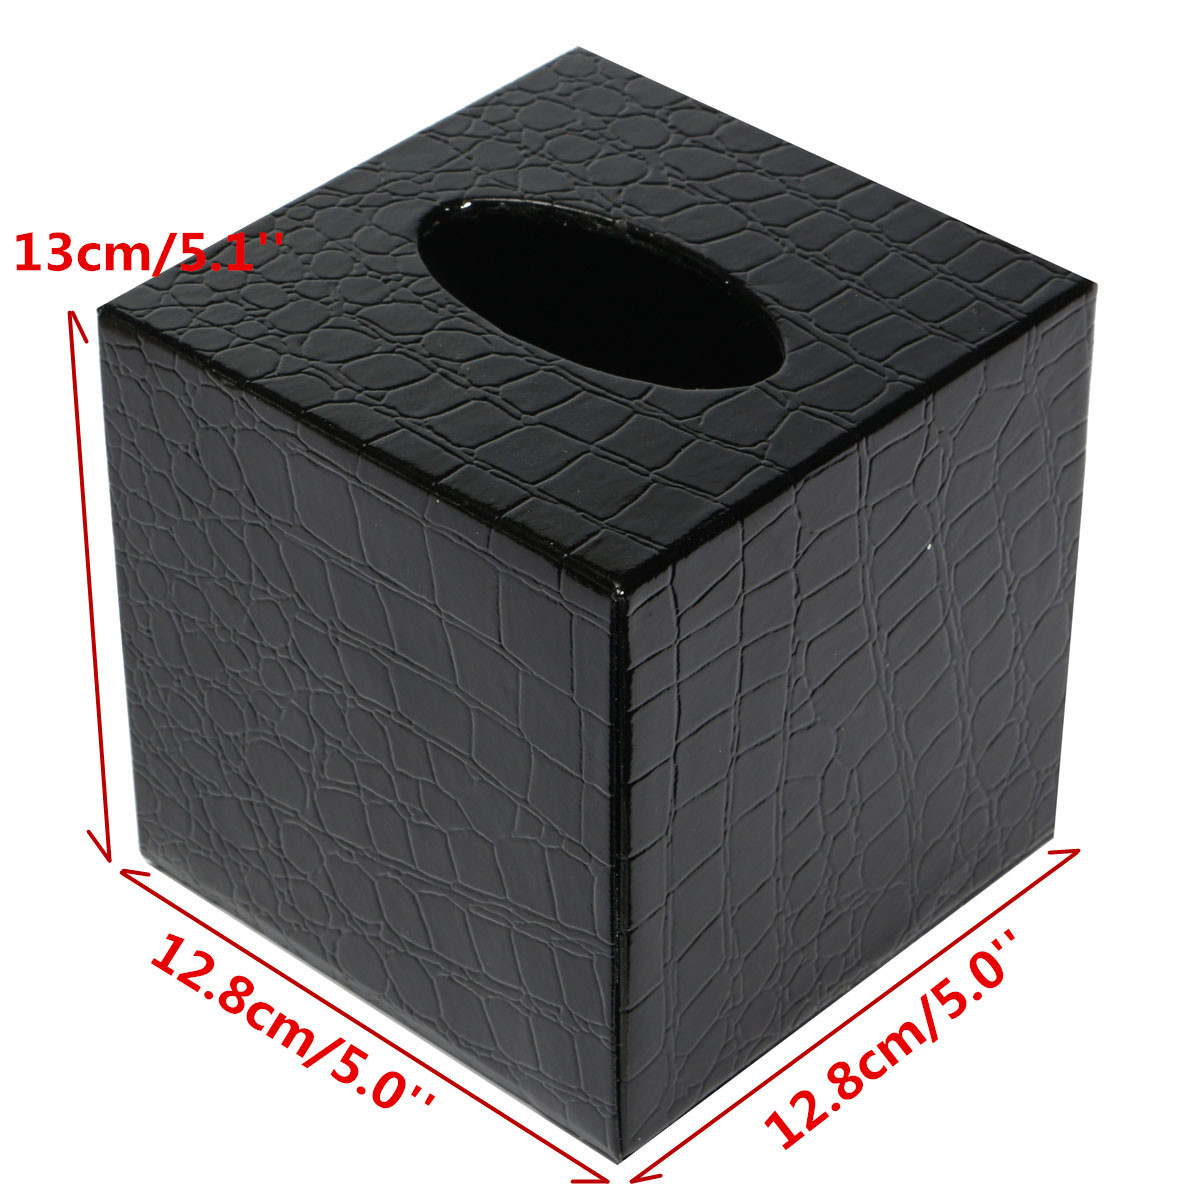 Durable-PU-Leather-Tissue-Box-Case-Cover--Paper-Napkin-Holder-Home-Office-1304877-5